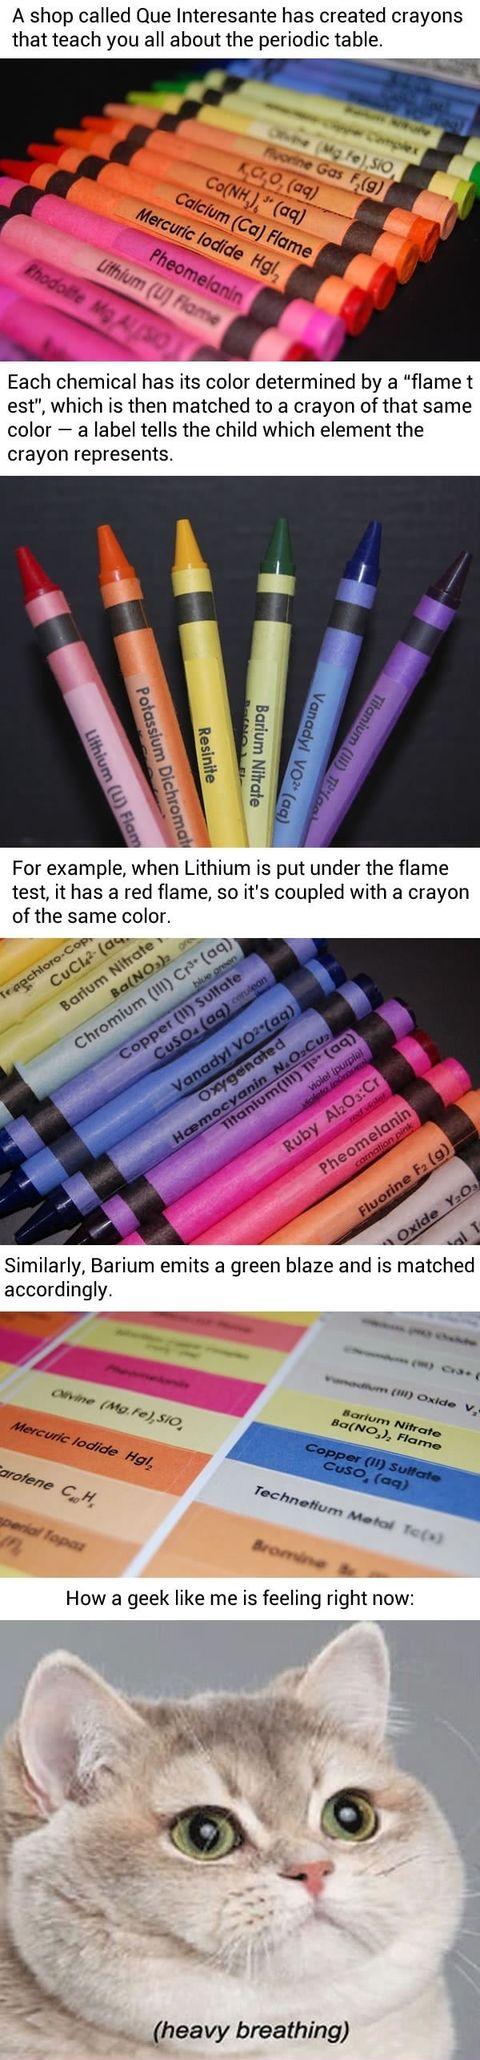 There are Element Crayons that help you learn the Periodic Table